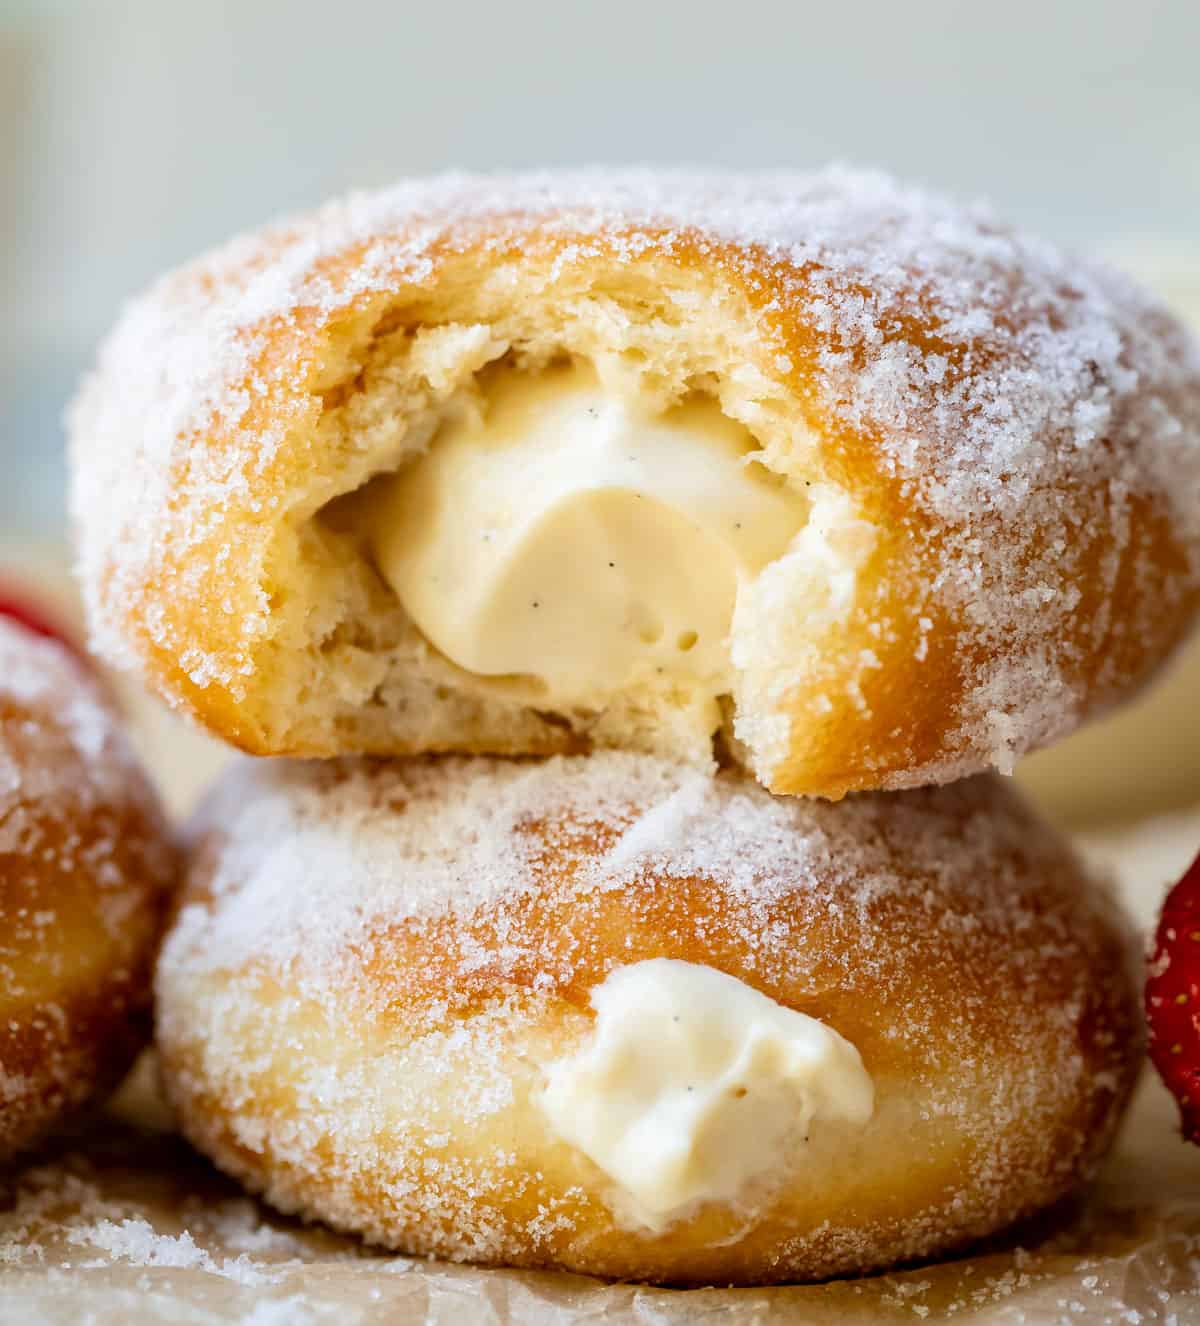 two stacked cream filled donuts and the top one has a bite taken from it, showing the cream filling.